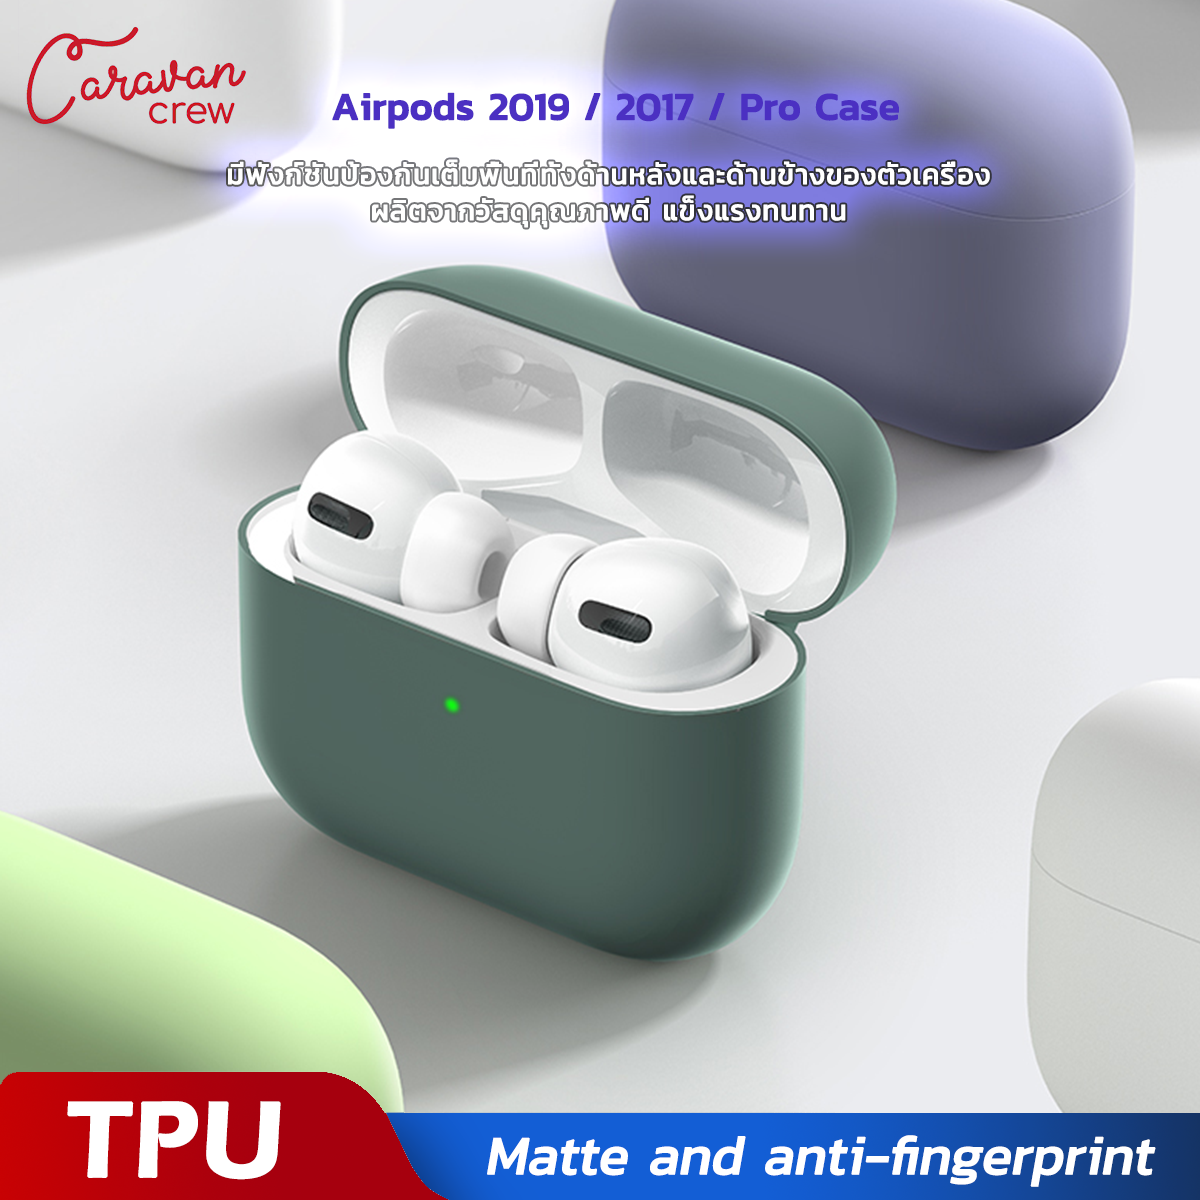 Caravan Crew For Airpods 2019 / 2017 Case Airpods 1, 2 Only !! Wireless Bluetooth Earphone